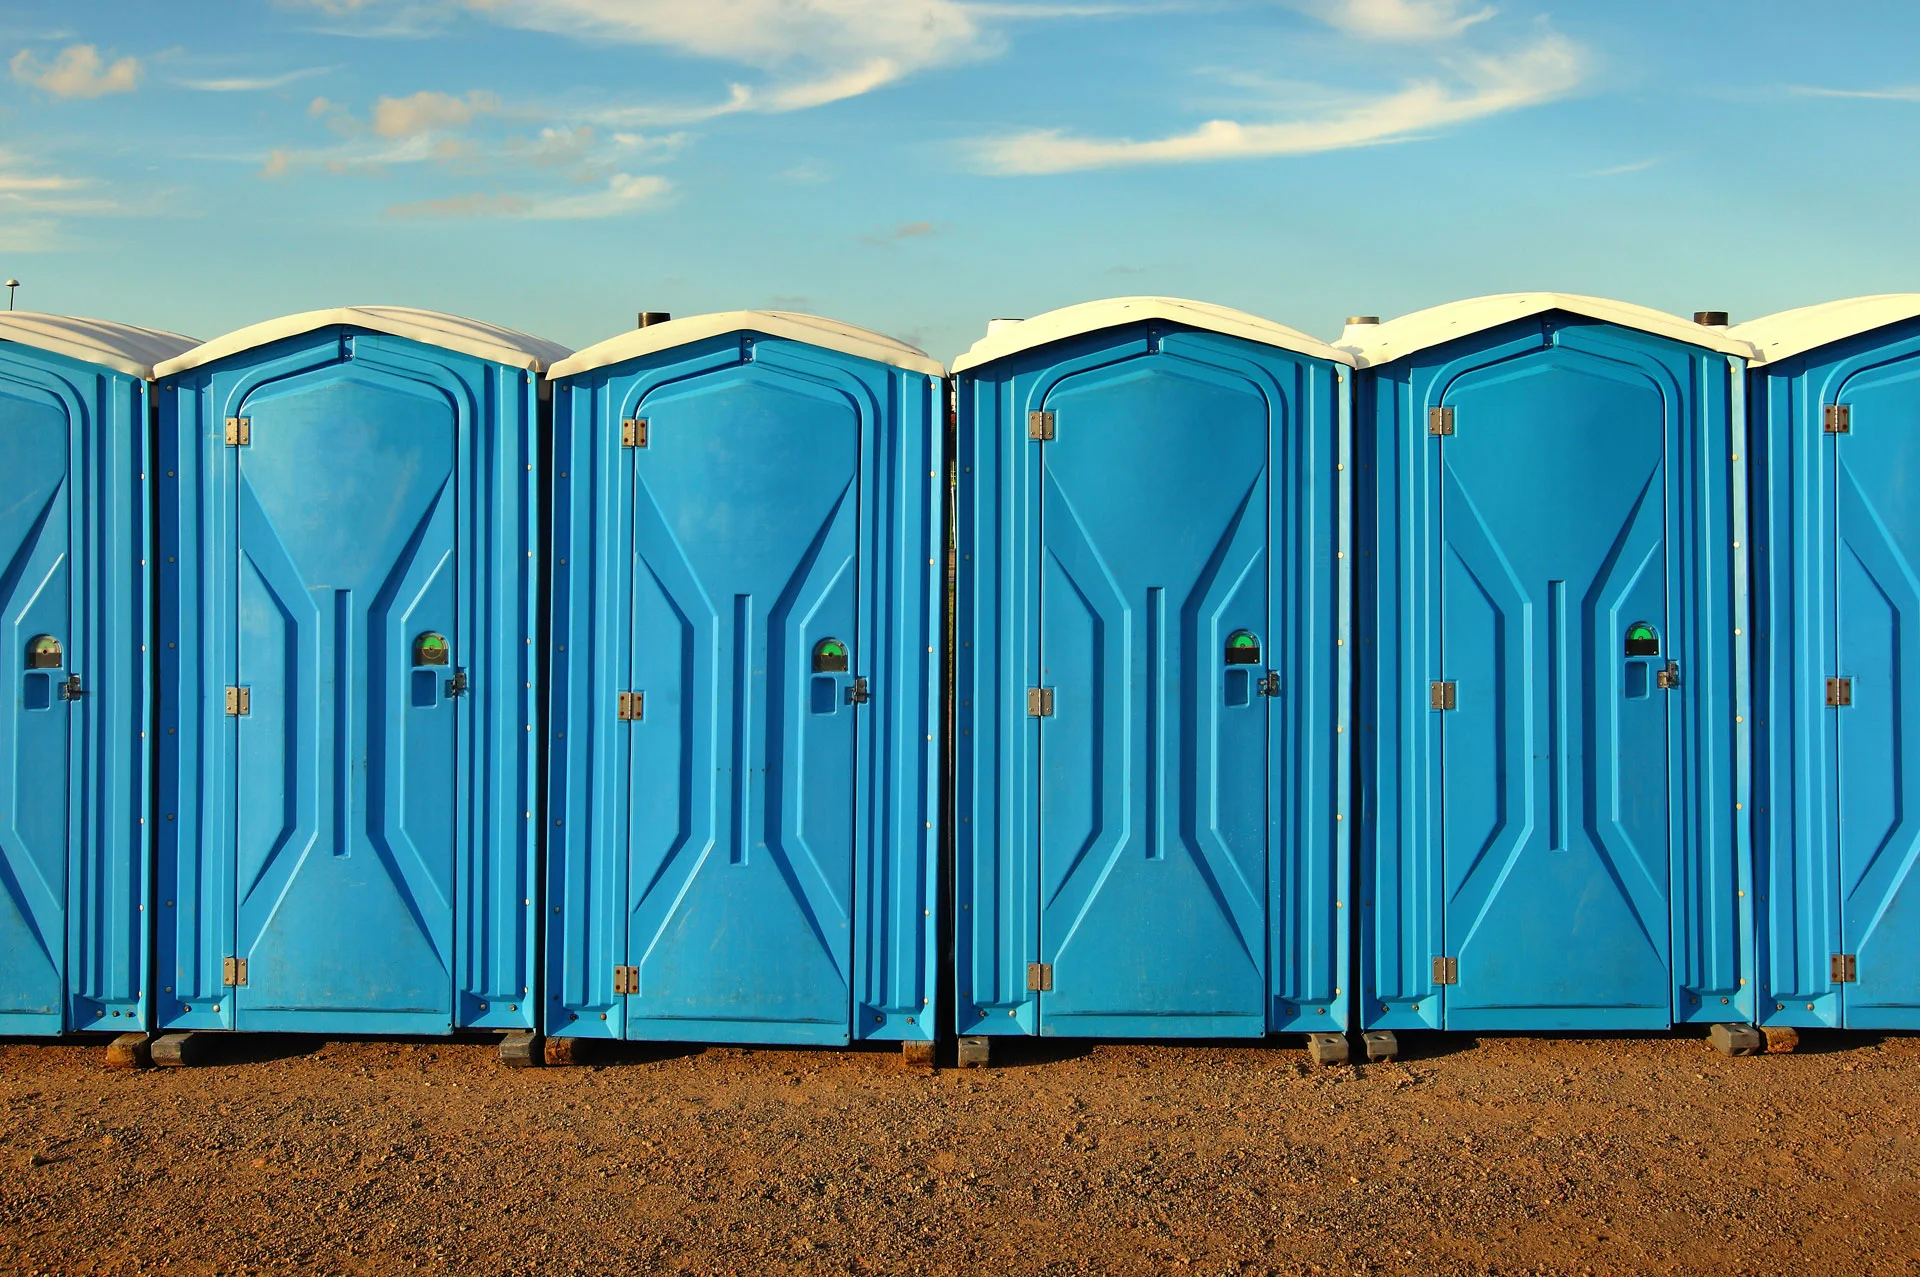 Construction Portable Toilets: The Key to Commerical Temporary Restroom Solutions in Porta Potty Rental Dallas TX